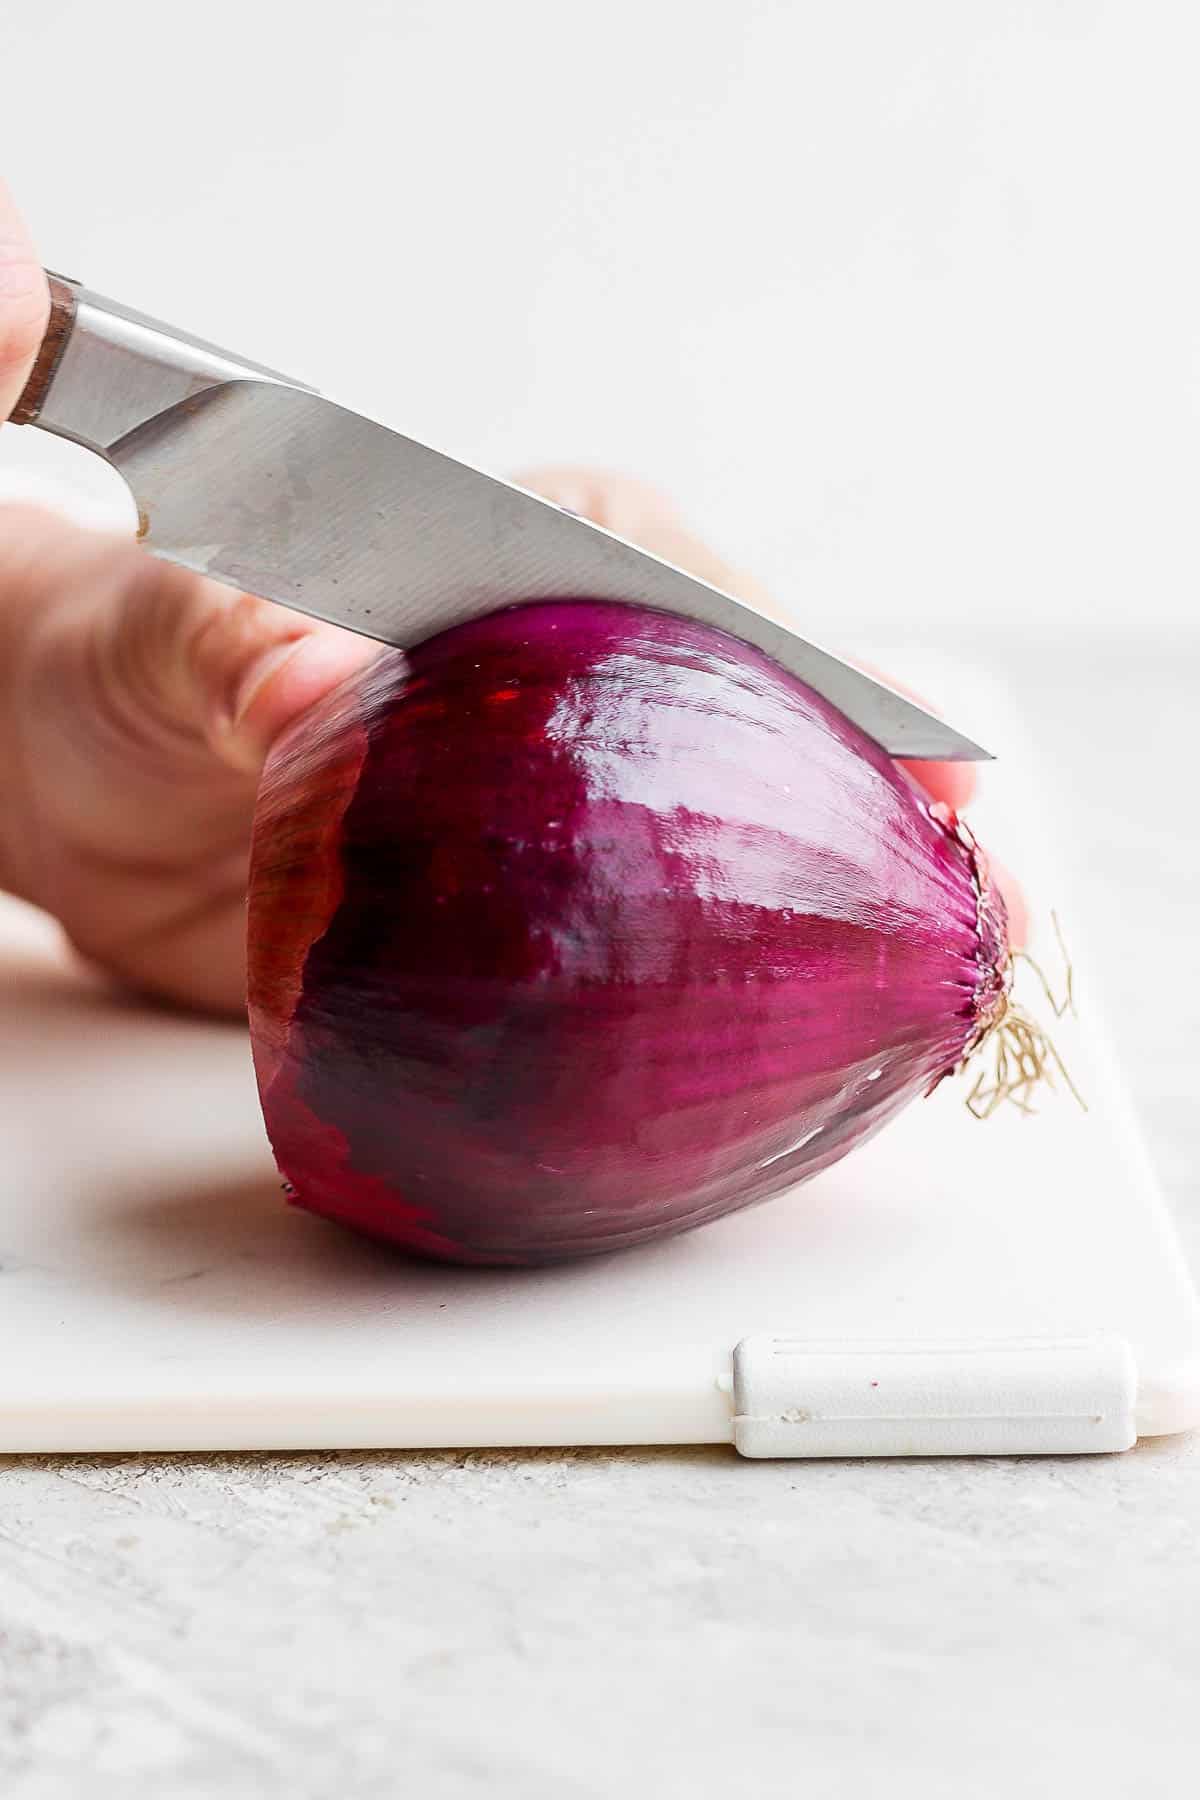 A large red onion being cut in half, lengthwise.